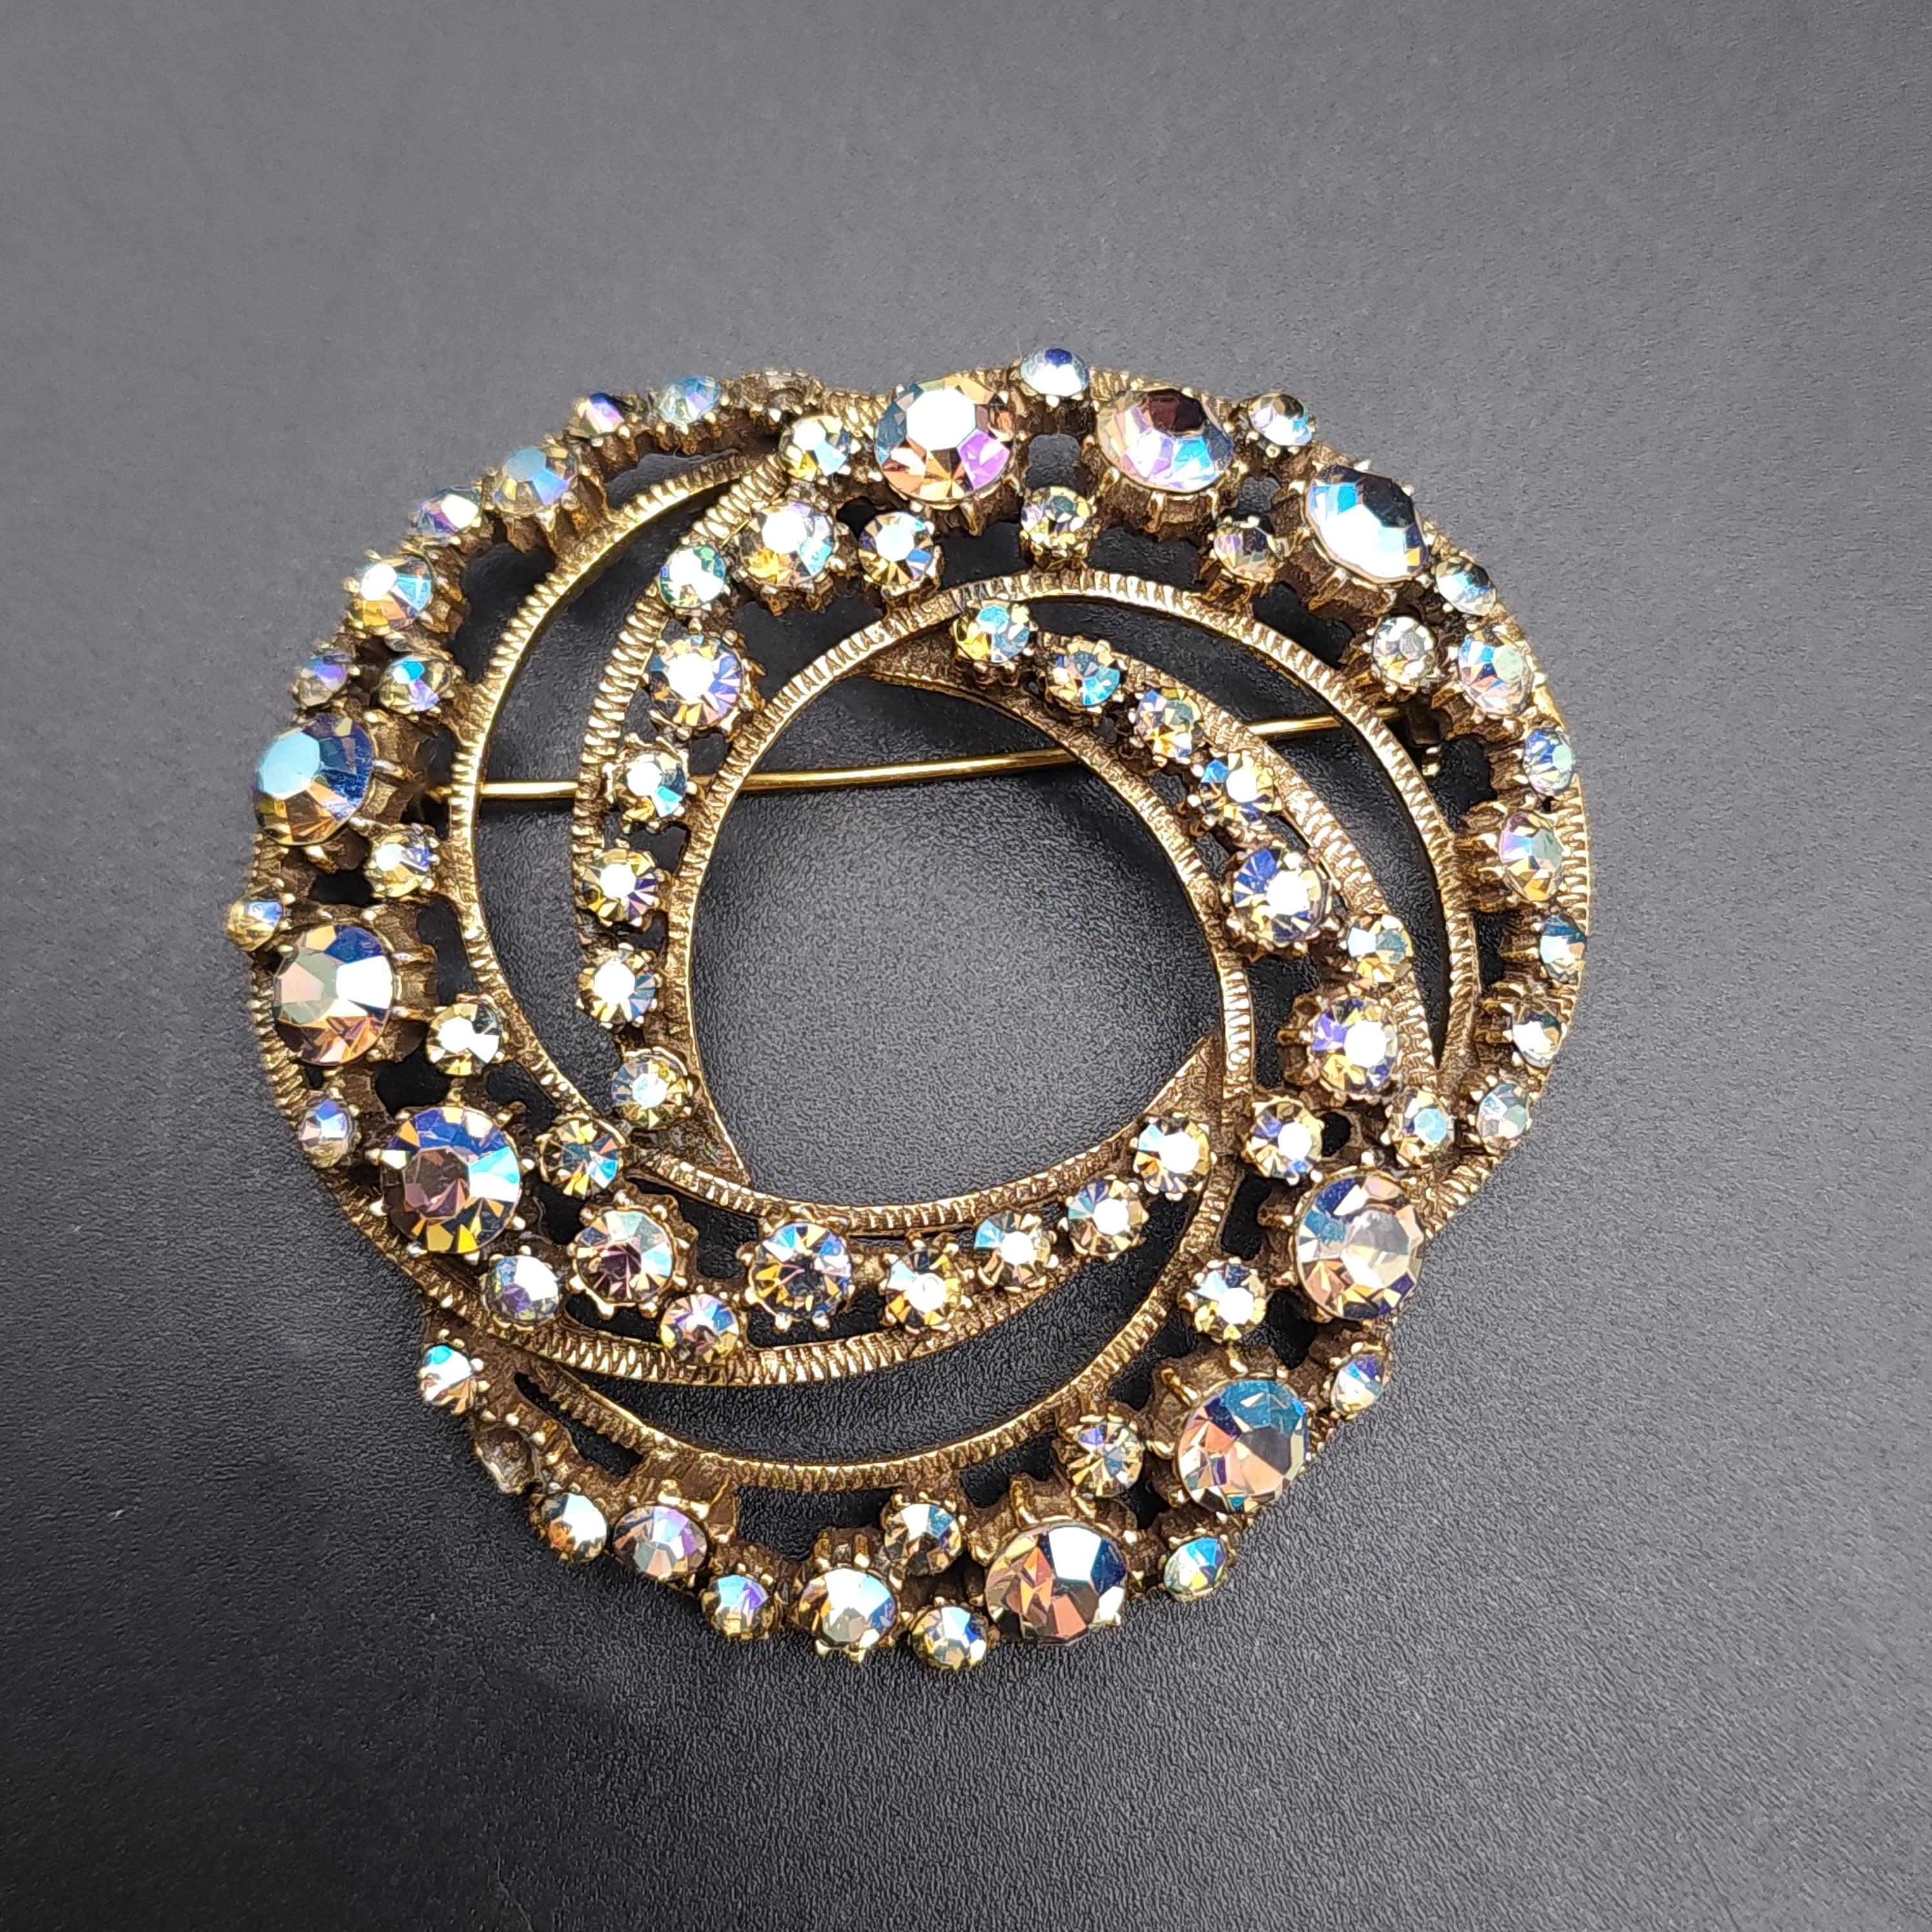 Brooch size: 2.5 inches
Earring size: 1.25 inches each

Discover the enchanting allure of the Florenza demi parure, a stunning set that includes clip-on earrings and a matching pin. Each piece is adorned with icy blue aurora borealis crystals,